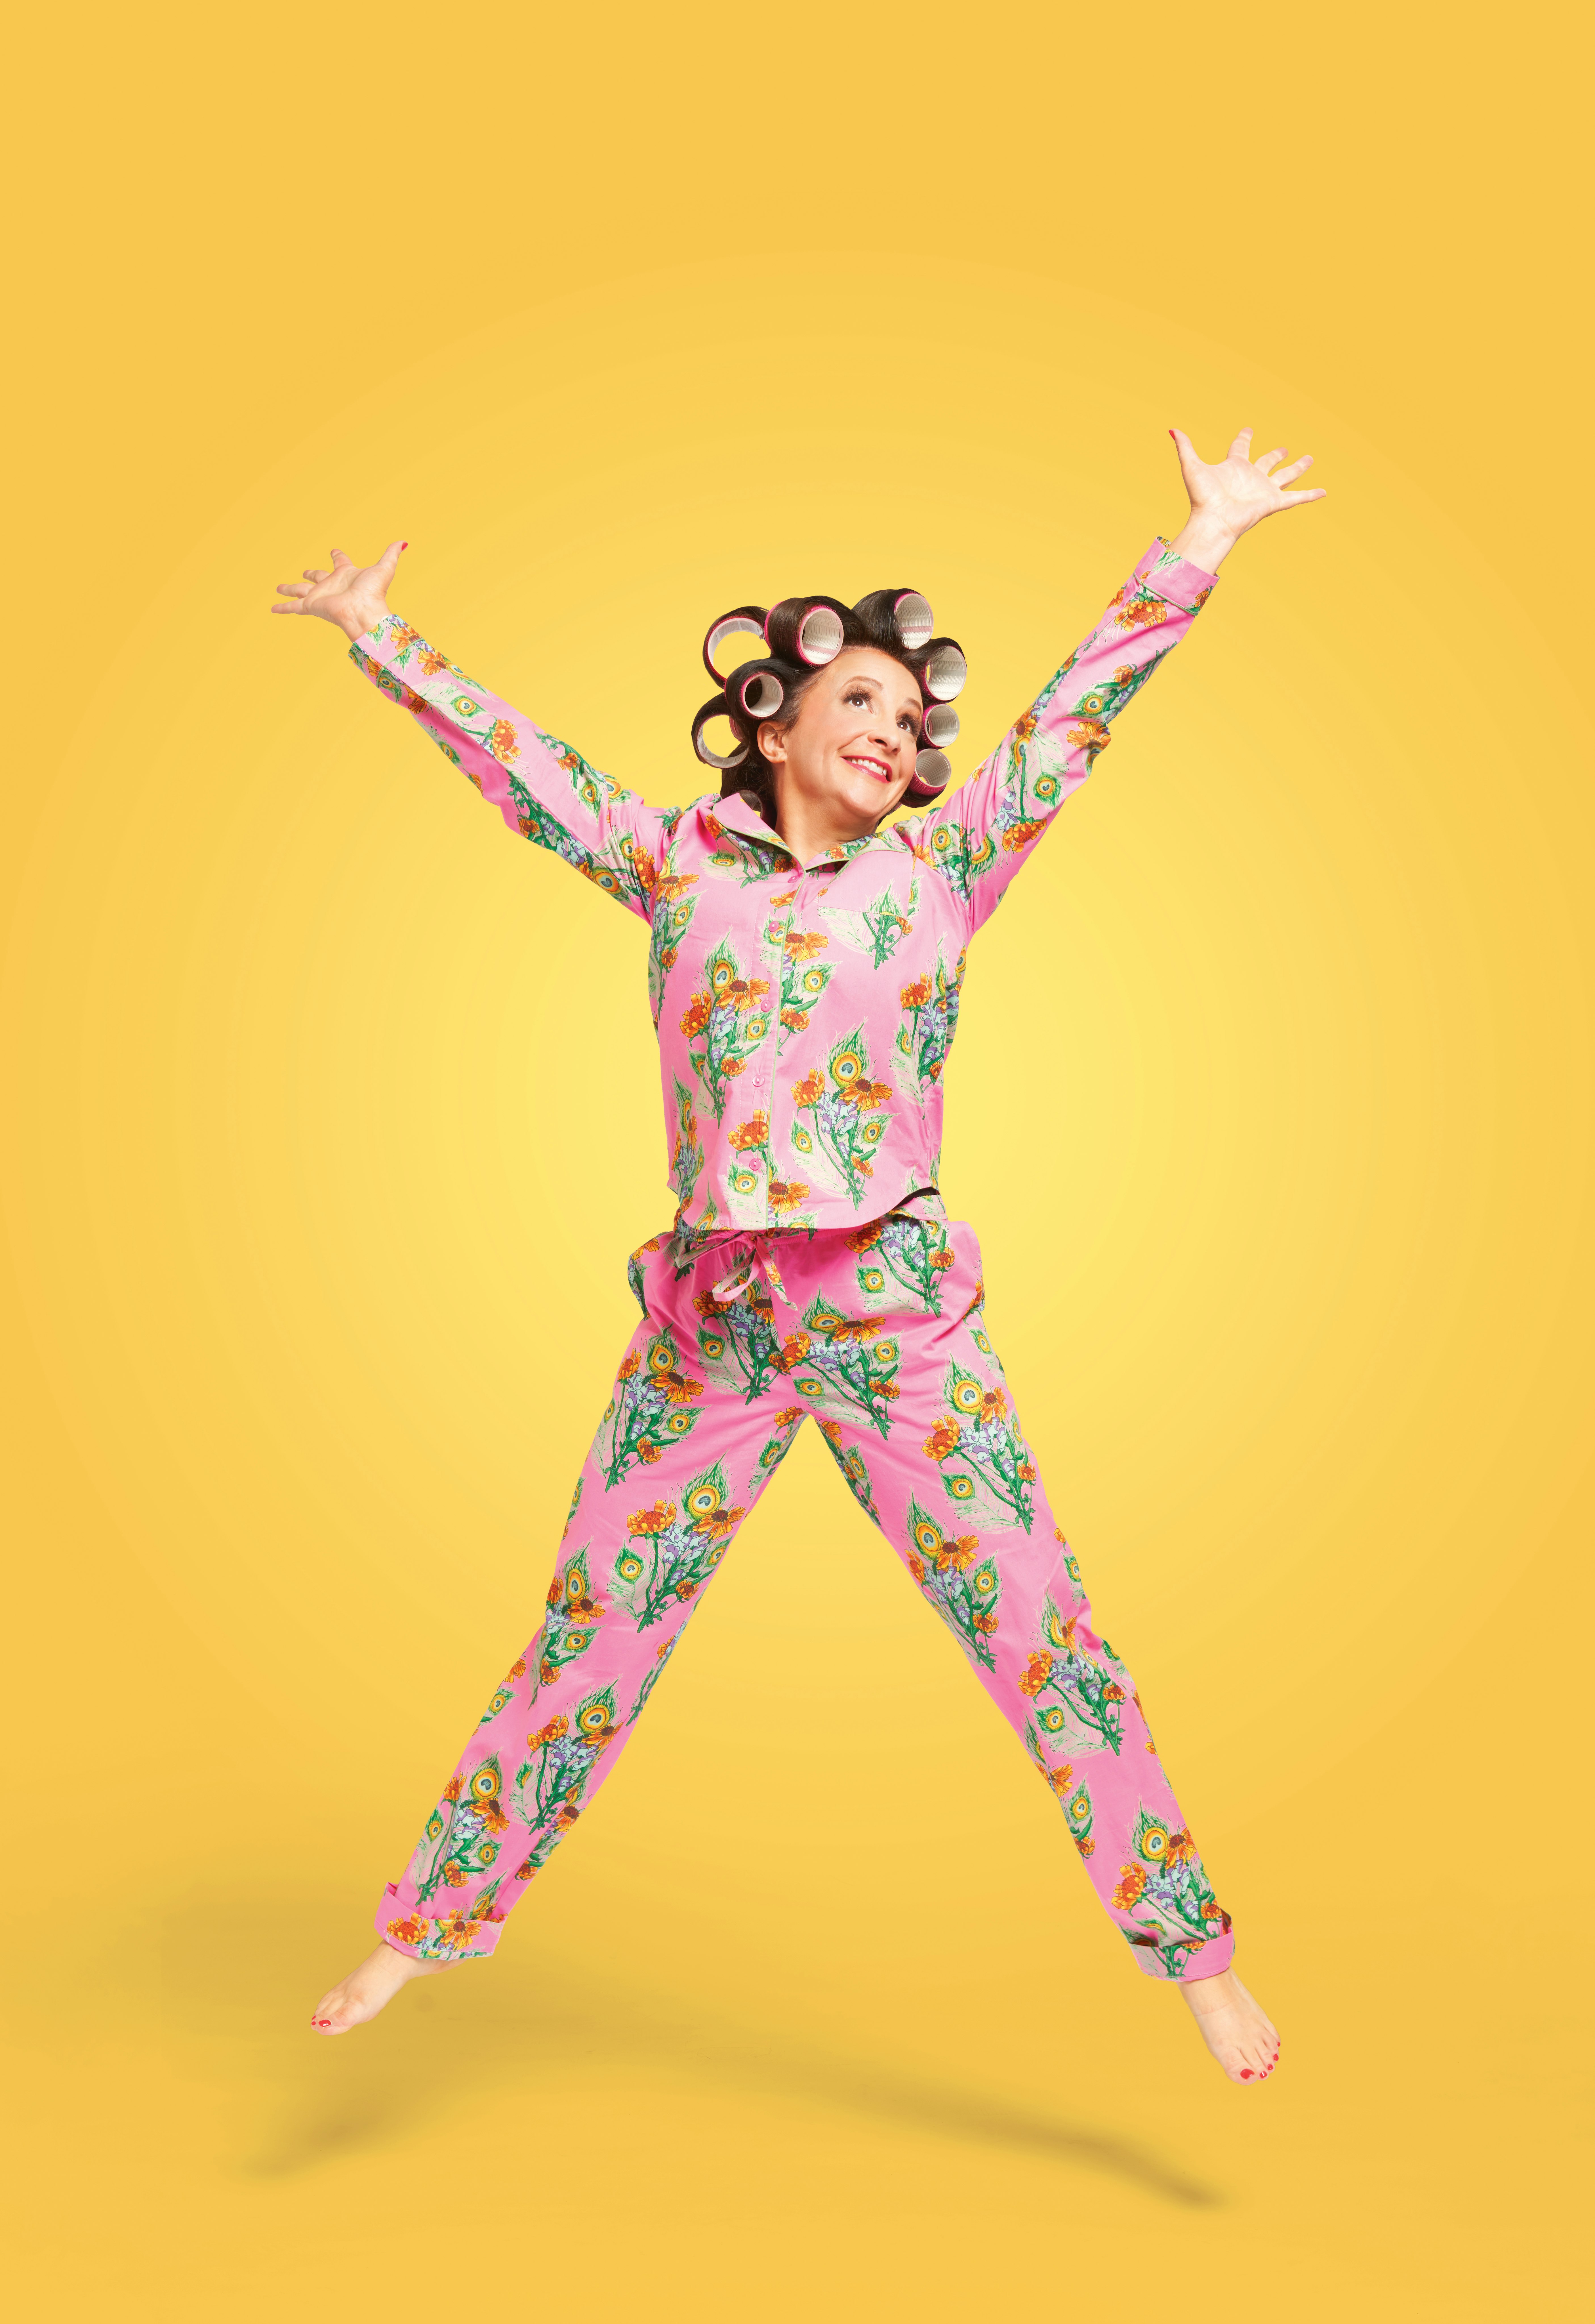 Image of Lucy Porter, wearing